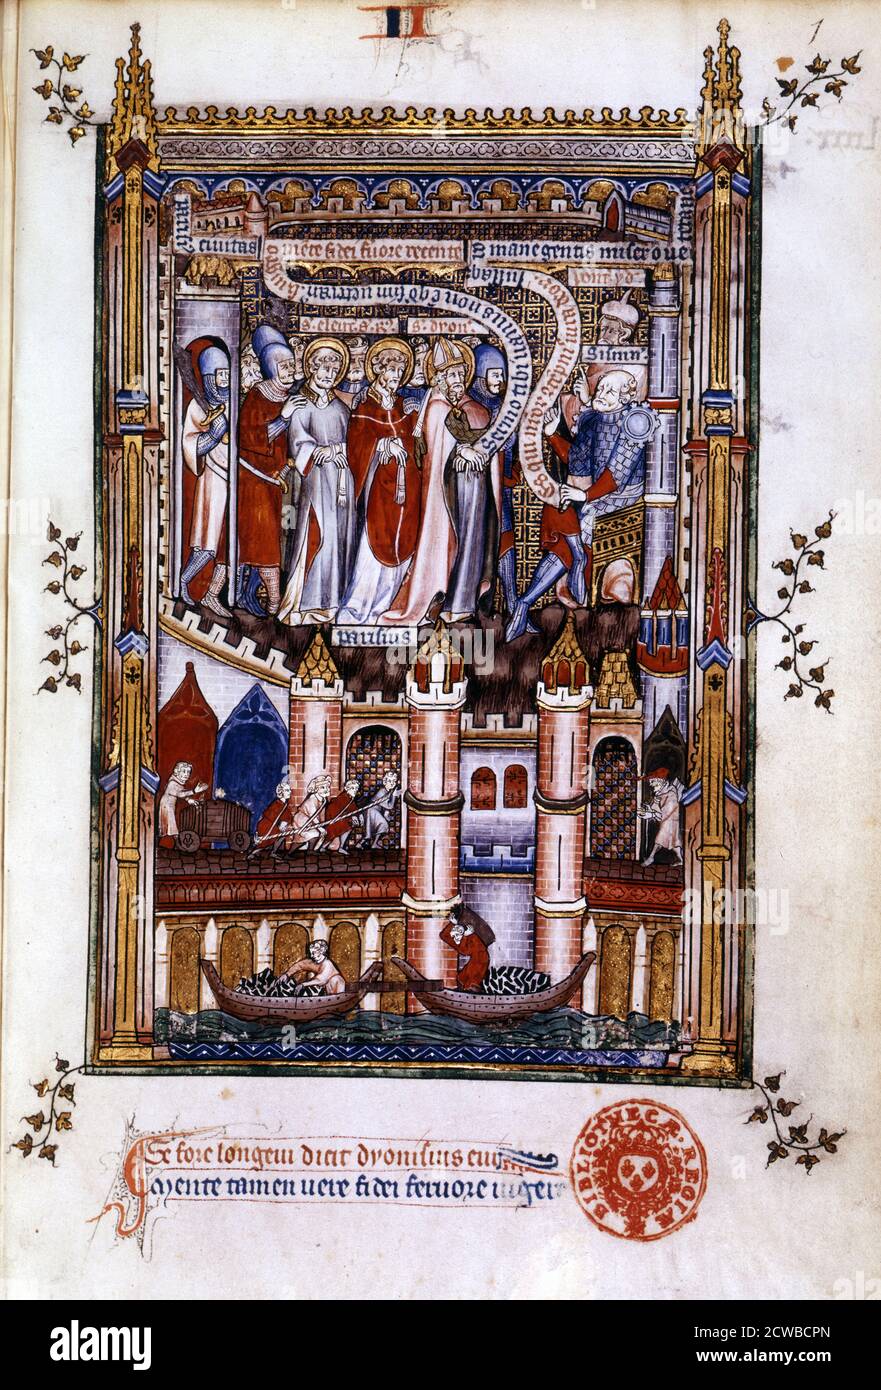 St Denis before Sisinnius, 1317. St Denis, St Eleutherius and St Rusticus are taken before Sisinnius, attended by his high priest. Manuscript illustration from a work on the life of St Denis (died c258 AD), written by Yves, a monk at the Abbey of St Denis. The book depicts the torture and martyrdom of the saint by the Roman governor Fescenninus Sisinnius. The lower scene depicts people on the bridge over the River Seine; showing four men pulling a barrel on wheels, a pilgrim, and a boat laden with coal. From the collection of the Bibliotheque Nationale, Paris. The artist is unknown. Stock Photo